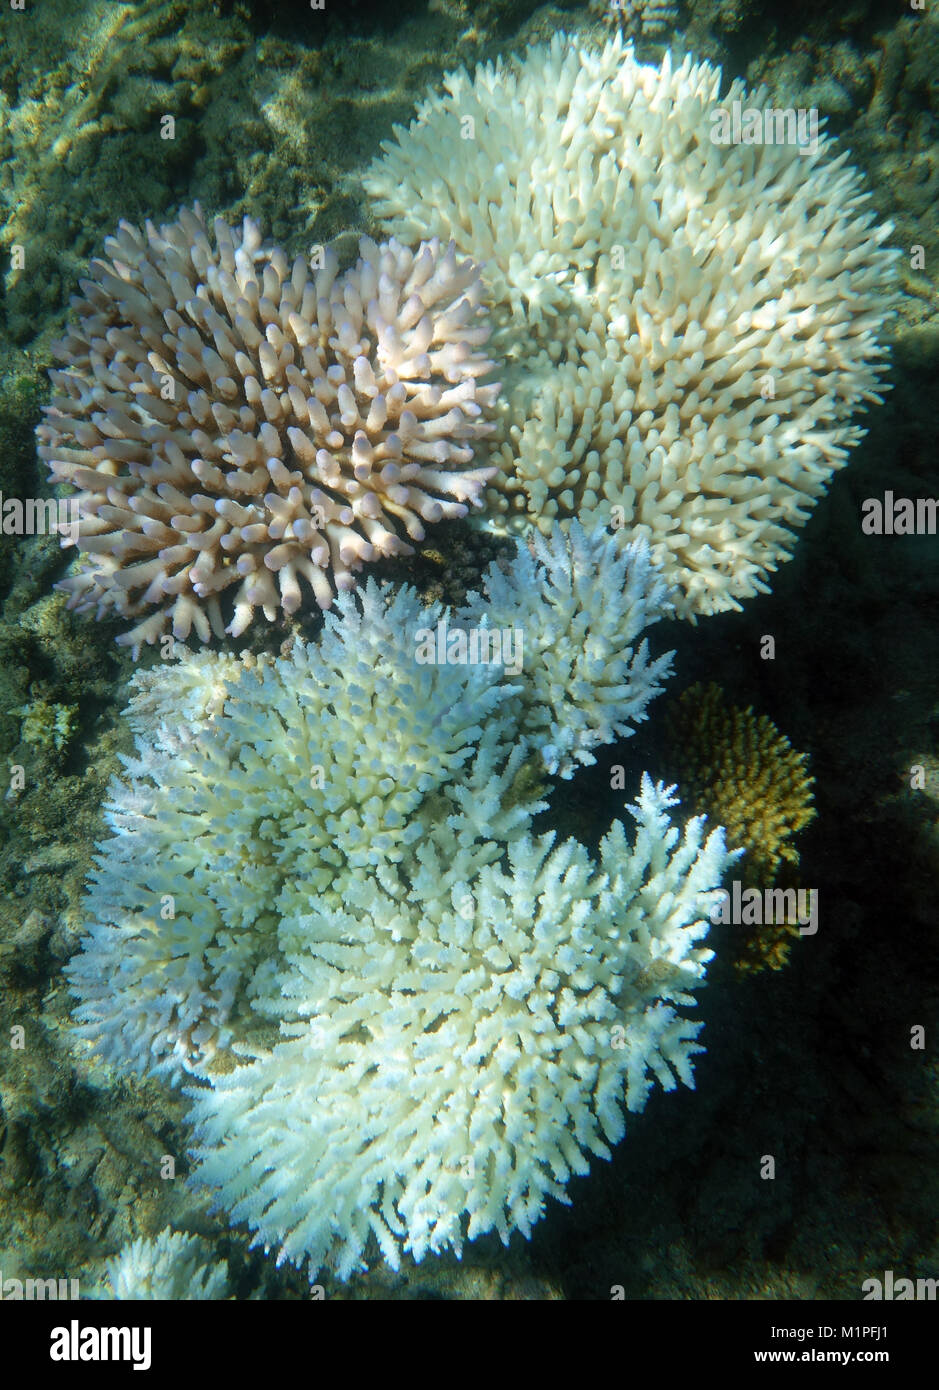 Acropora coral colonies in various stages of fluorescing and bleaching, Great Barrier Reef, March 2017 Stock Photo